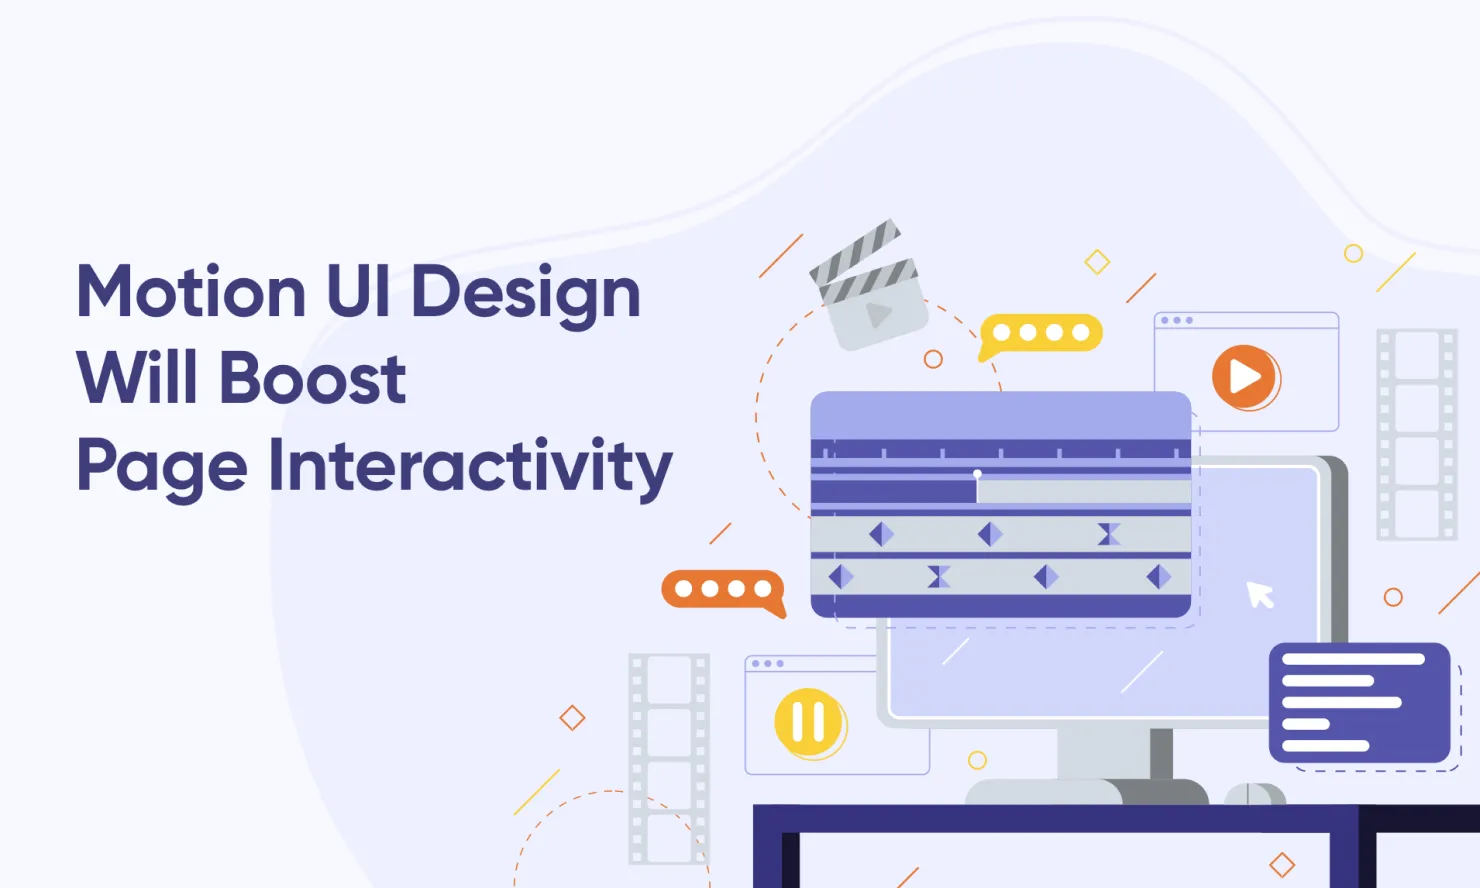 Motion UI Design Will Boost Page Interactivity